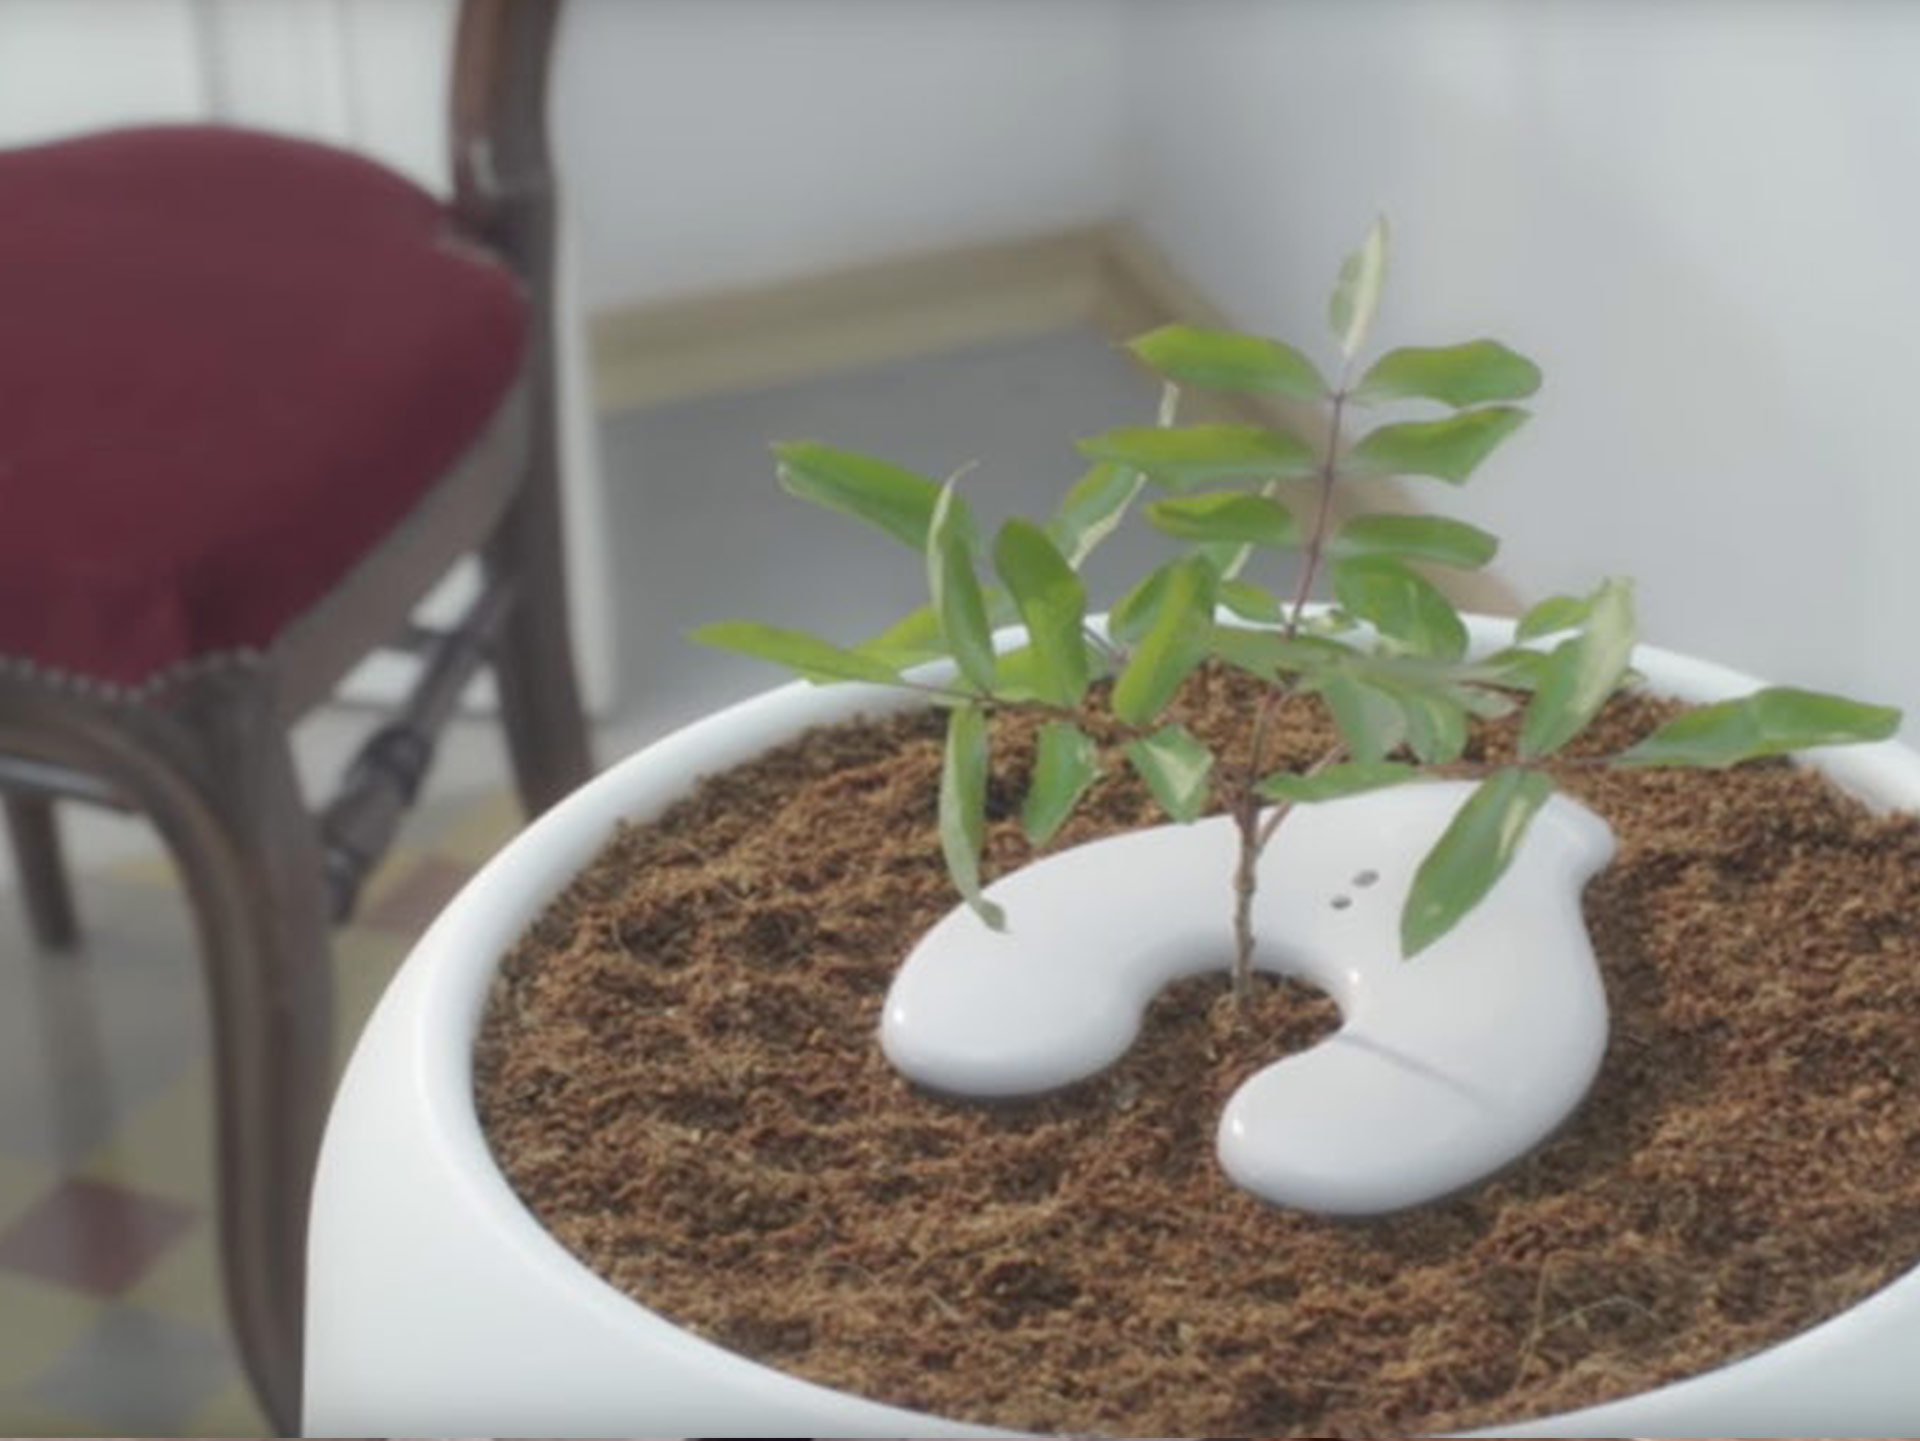 New urn will transform your loved one’s ashes into a tree